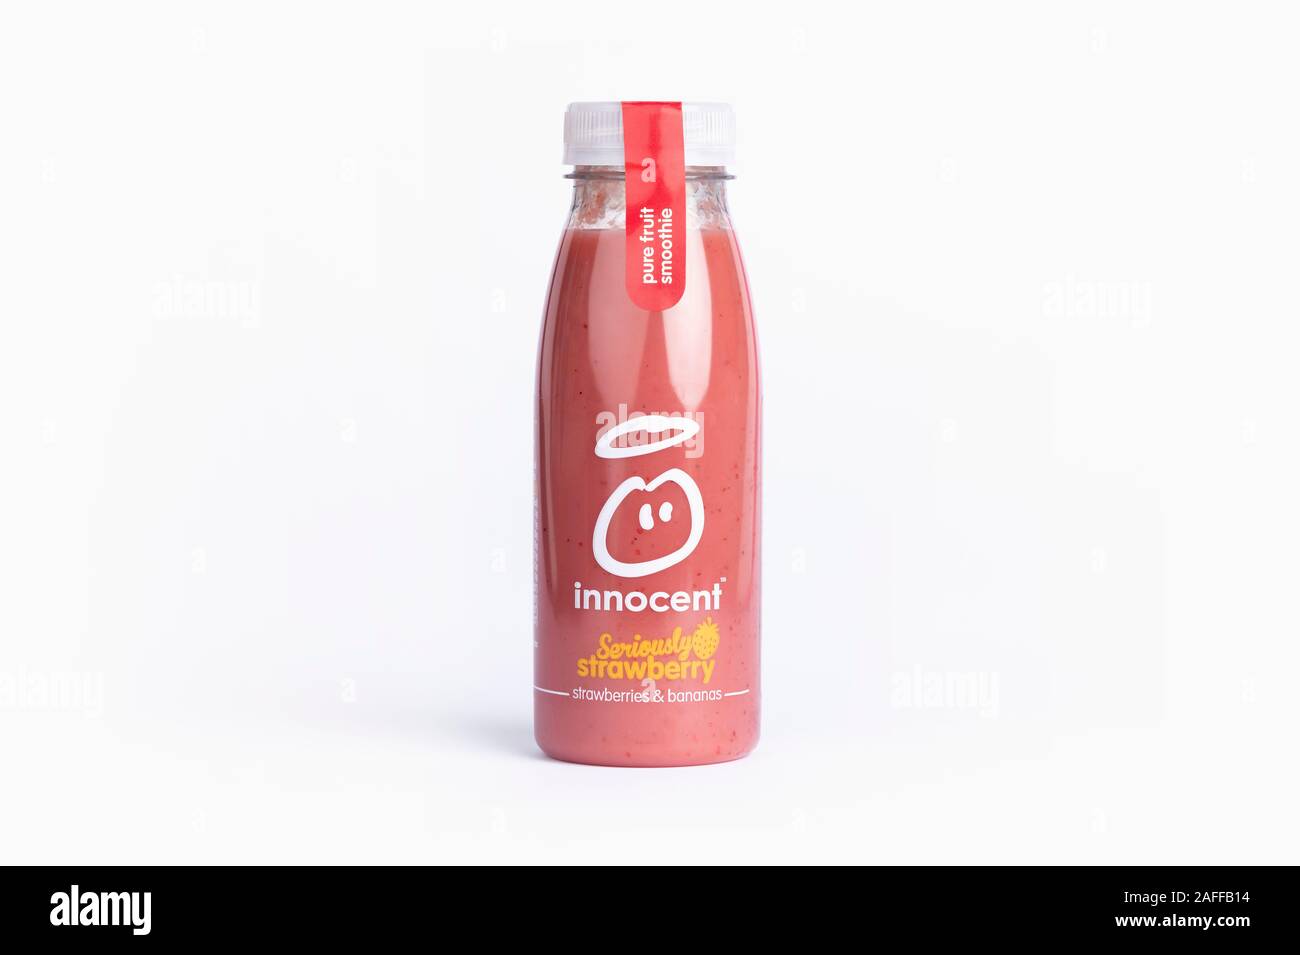 A bottle of Innocent Seriously Strawberry smoothie drink shot on a yellow background. Stock Photo